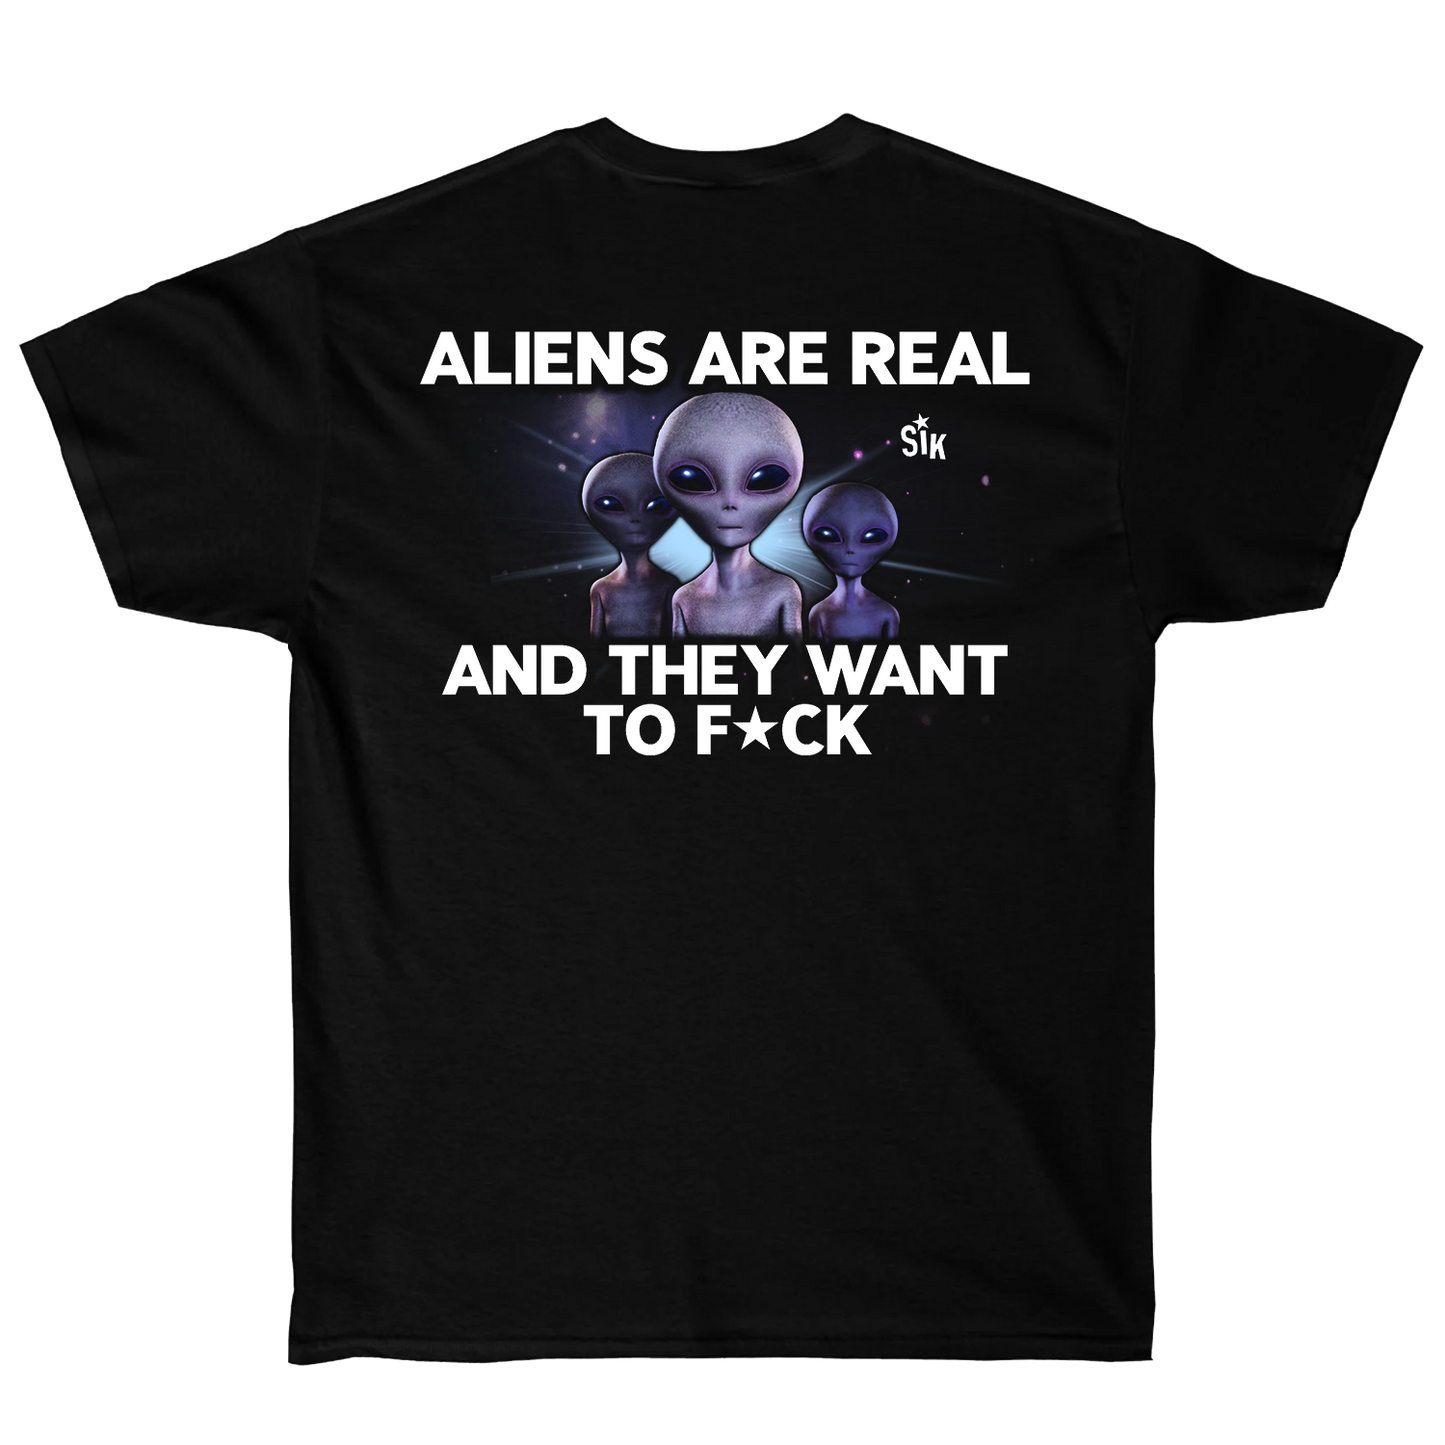 Aliens are Real Tee